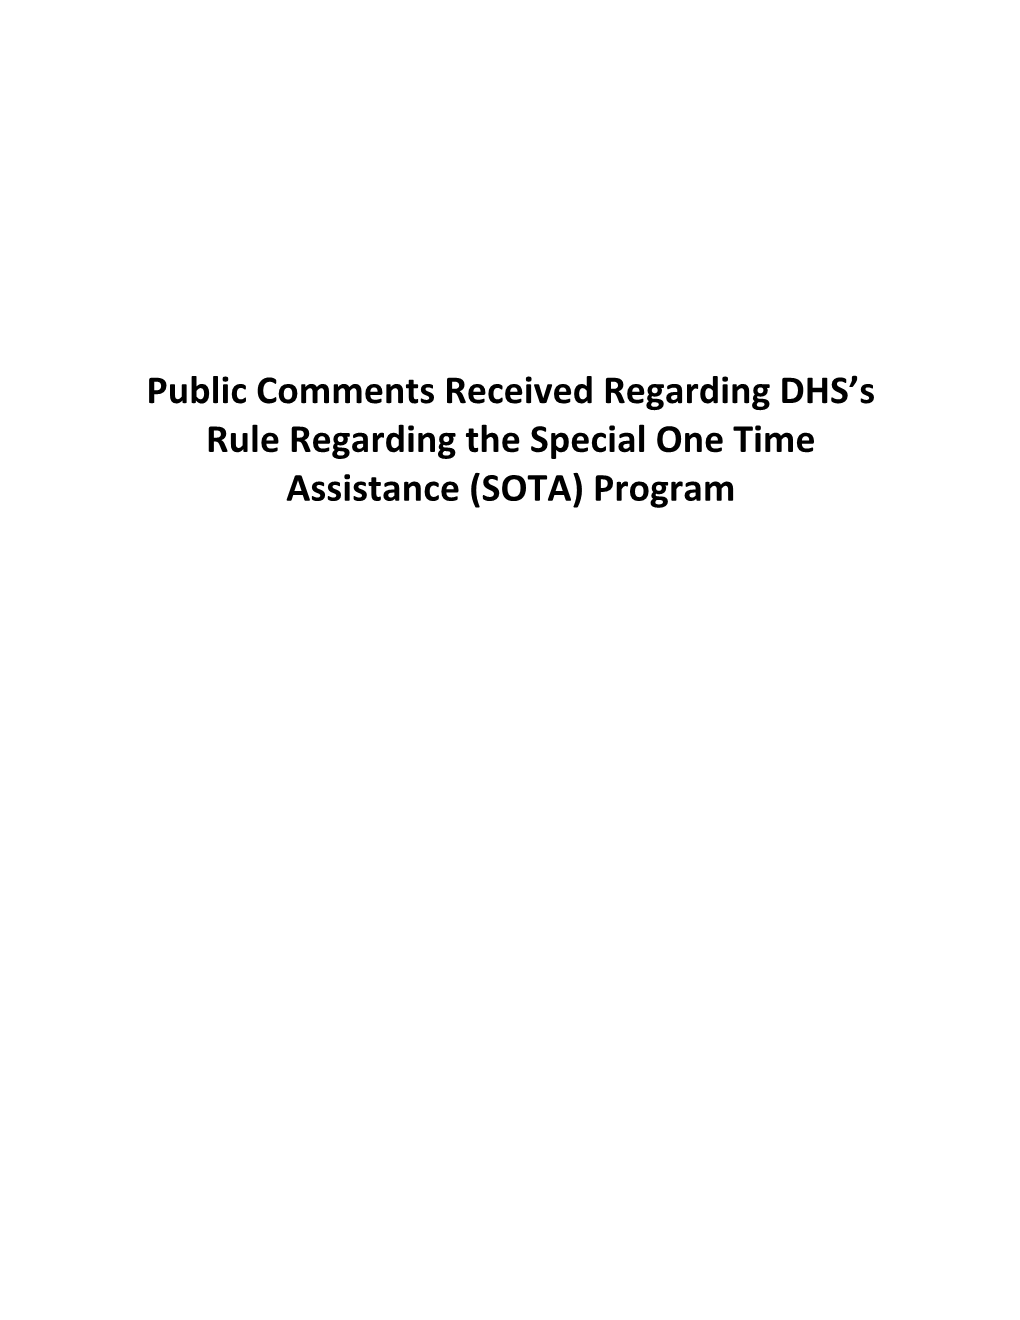 Public Comments Received Regarding DHS's Rule Regarding the Special One Time Assistance (SOTA) Program